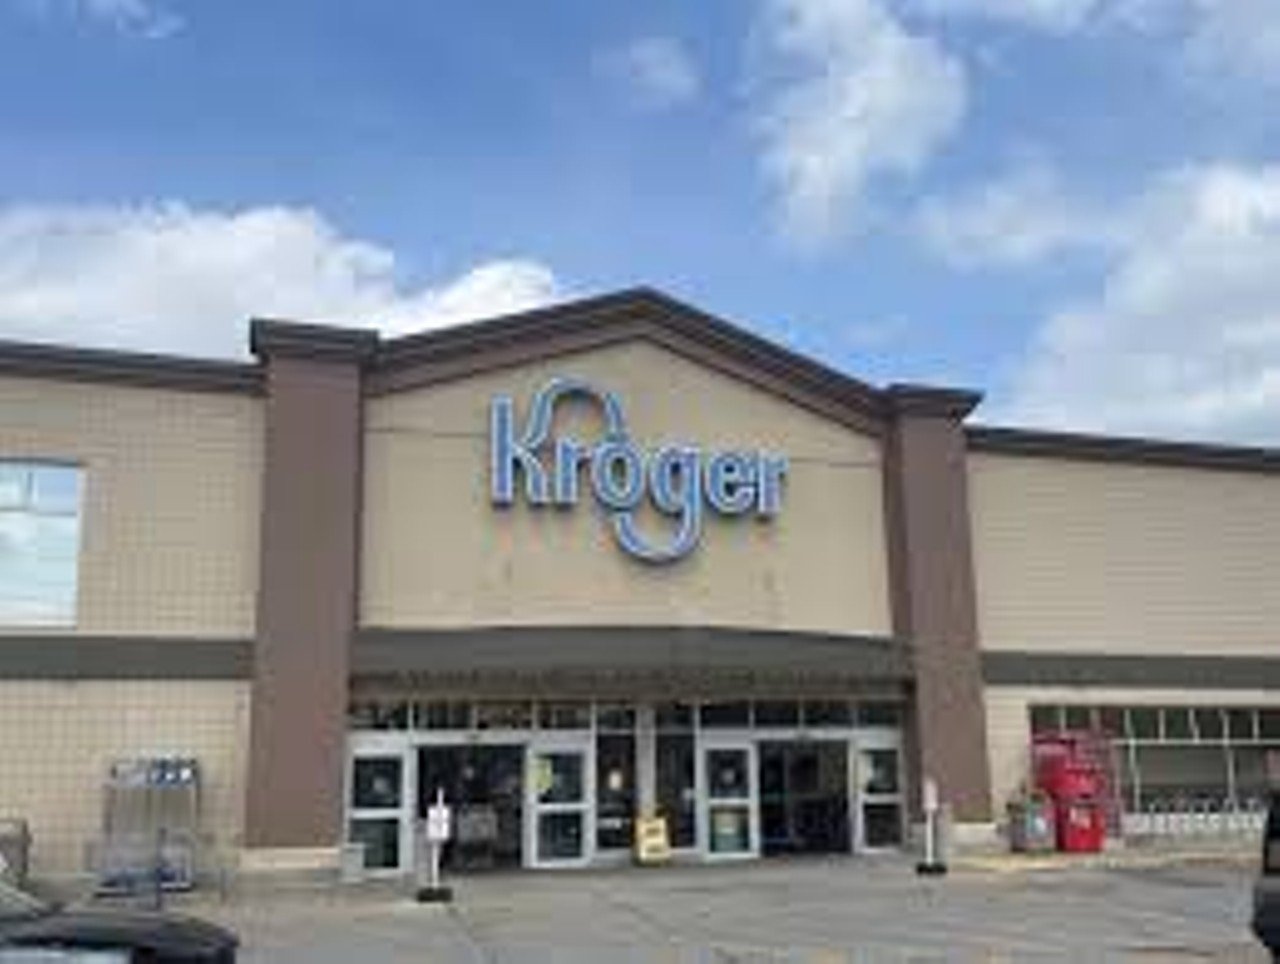 Third Street Kroger
Nickname: Panhandler Kroger, On the way to Vietnam Kitchen Kroger
Many love this Kroger for what it is. It’s easy to get in and out quickly, but it’s not a huge store.